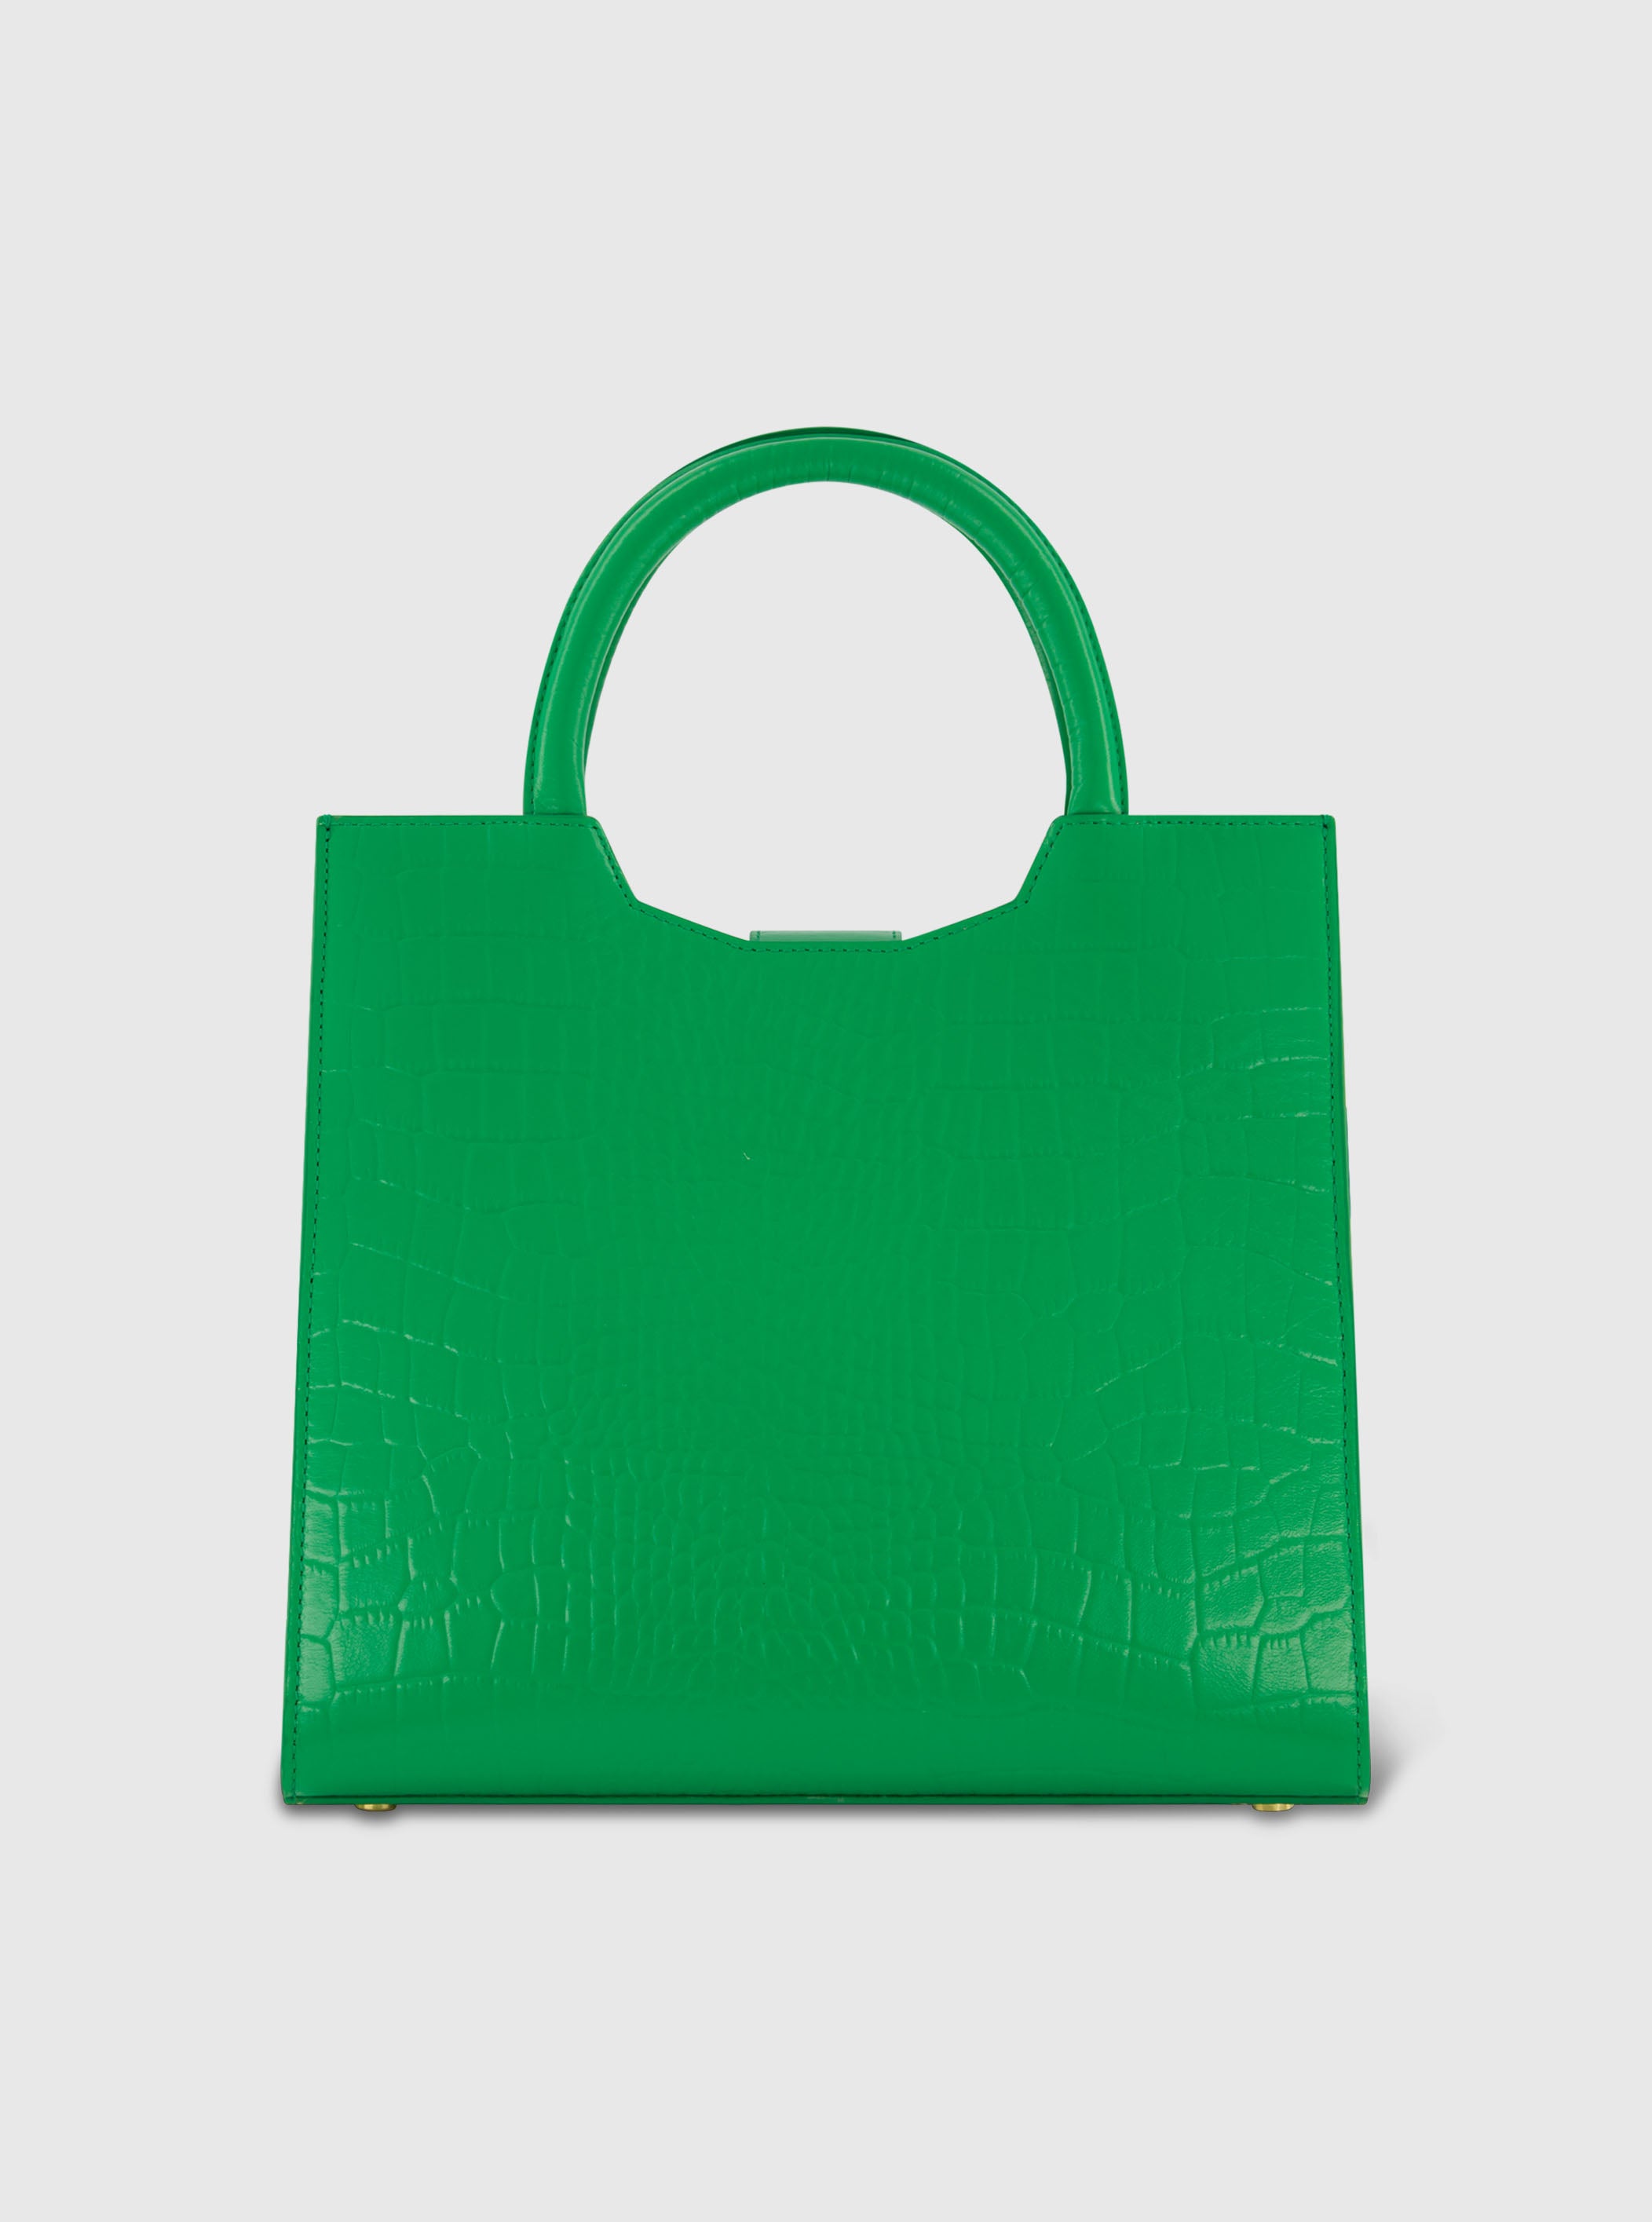 Buckled Medium Croco Green Leather Tote Bag with Detachable Strap